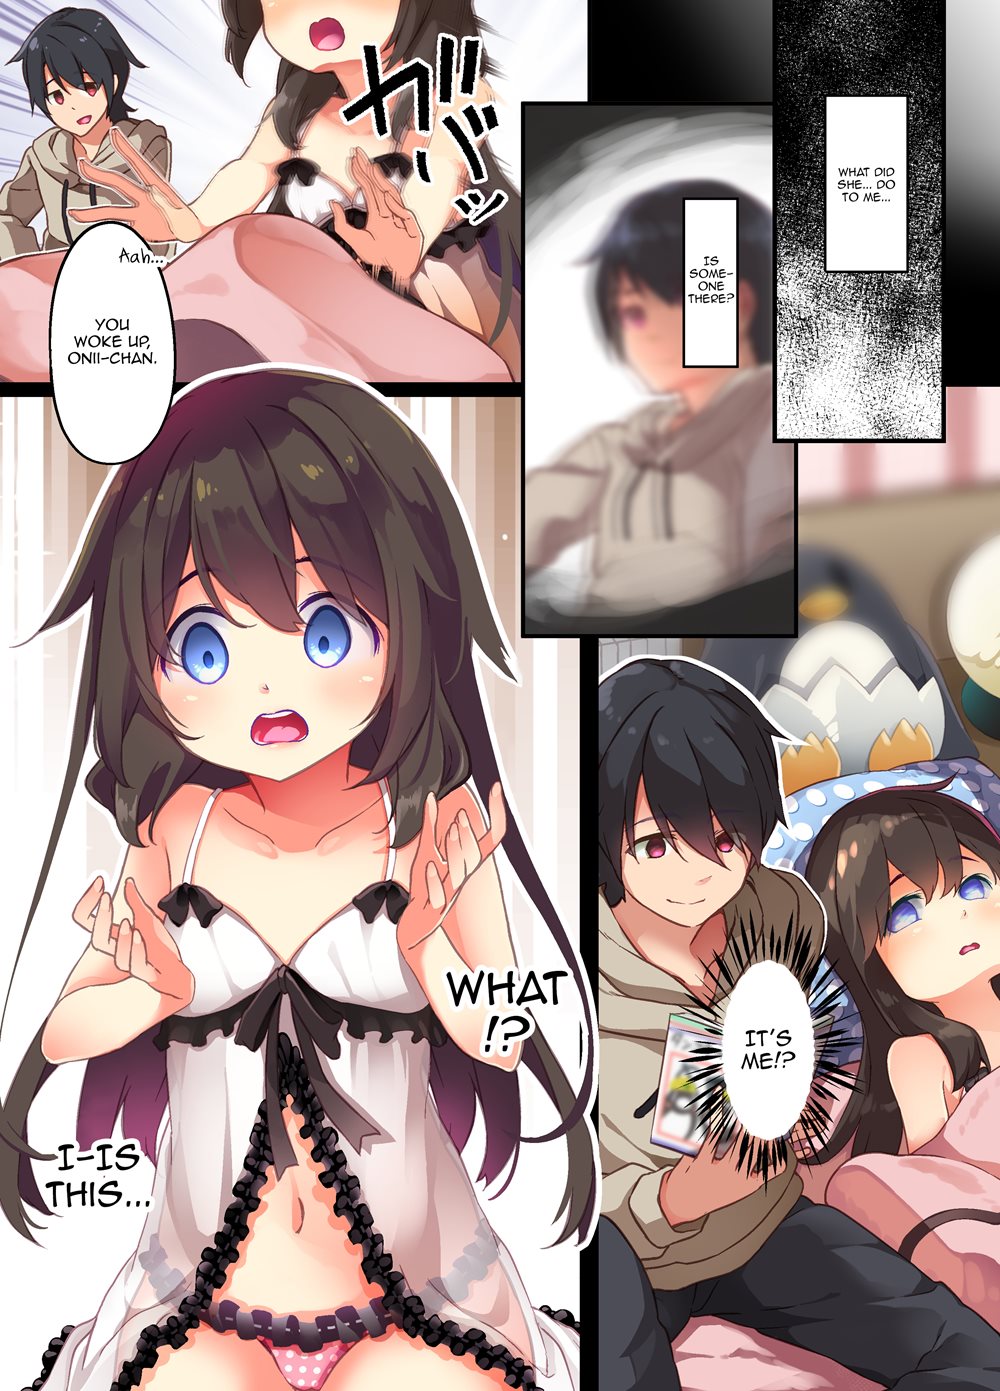 Page 9 A Yandere Little Sister Wants To Be Impregnated By Her Big Brother, So She Switches Bodies With Him And They Have Baby-Making Sex (Original) image